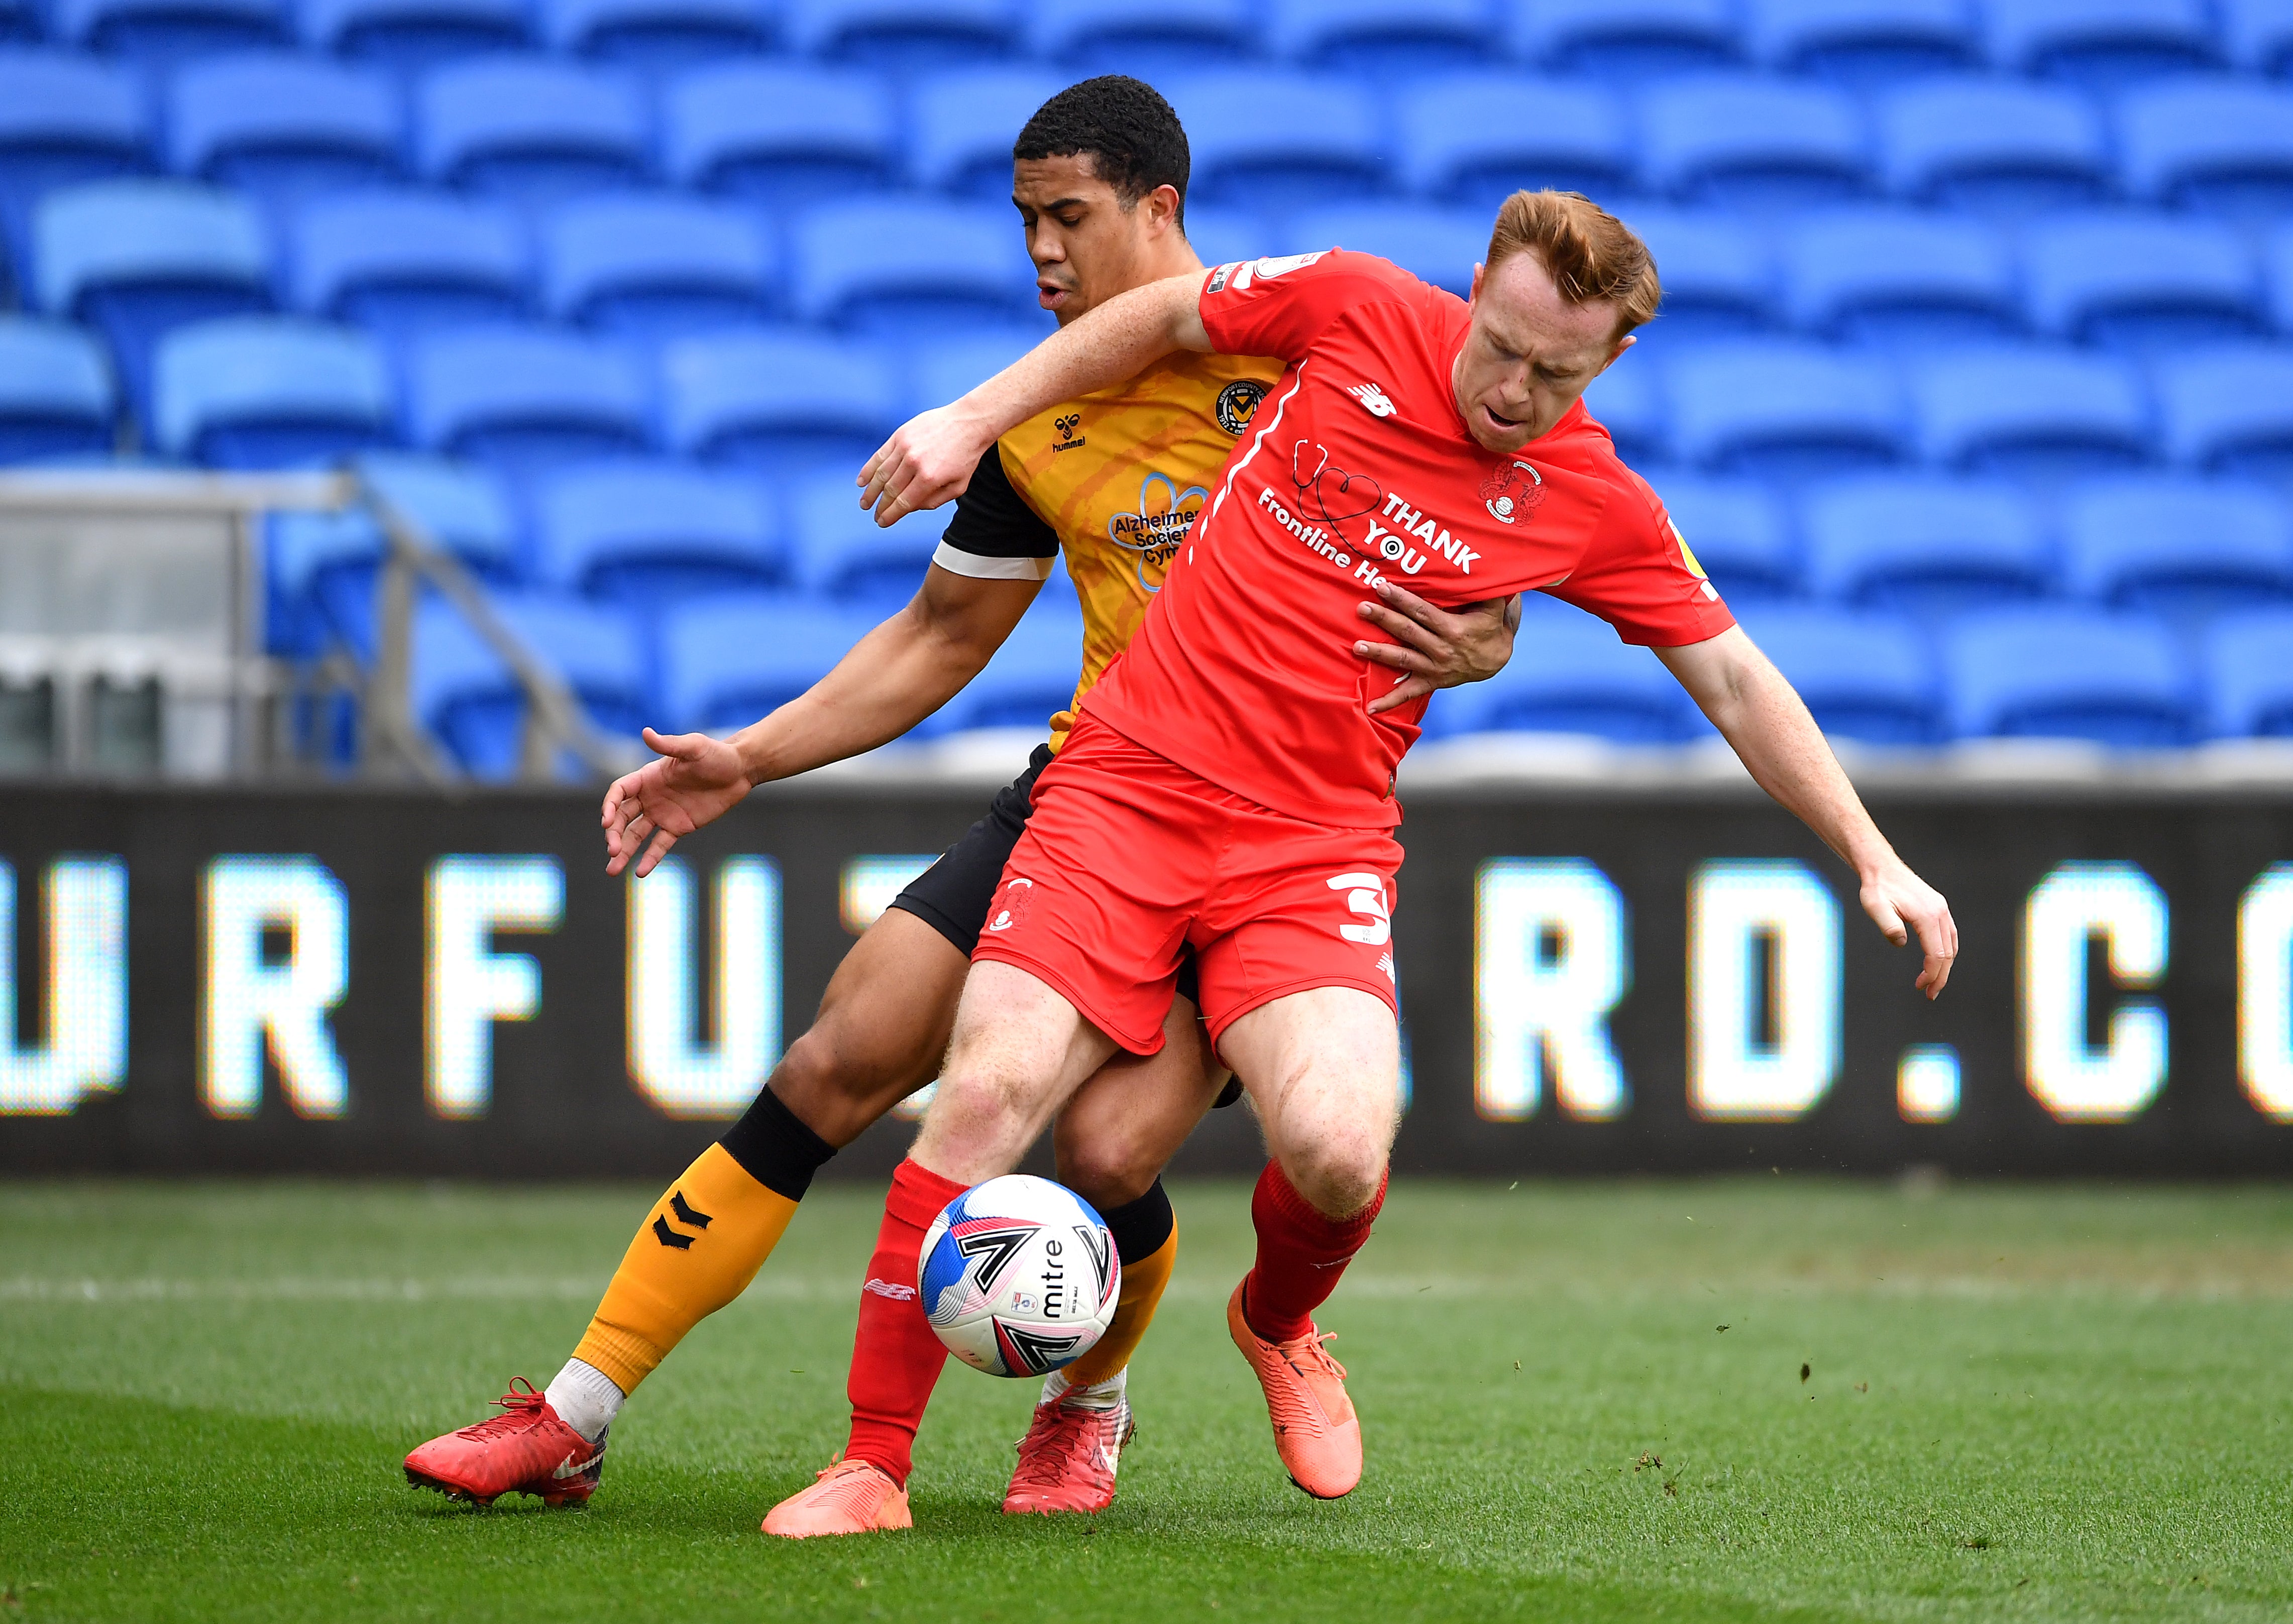 Newport County’s Priestley Farquharson (left) and Leyton Orient’s Danny Johnson battle for the ball during the Sky Bet League Two match at the Cardiff City Stadium, Cardiff.